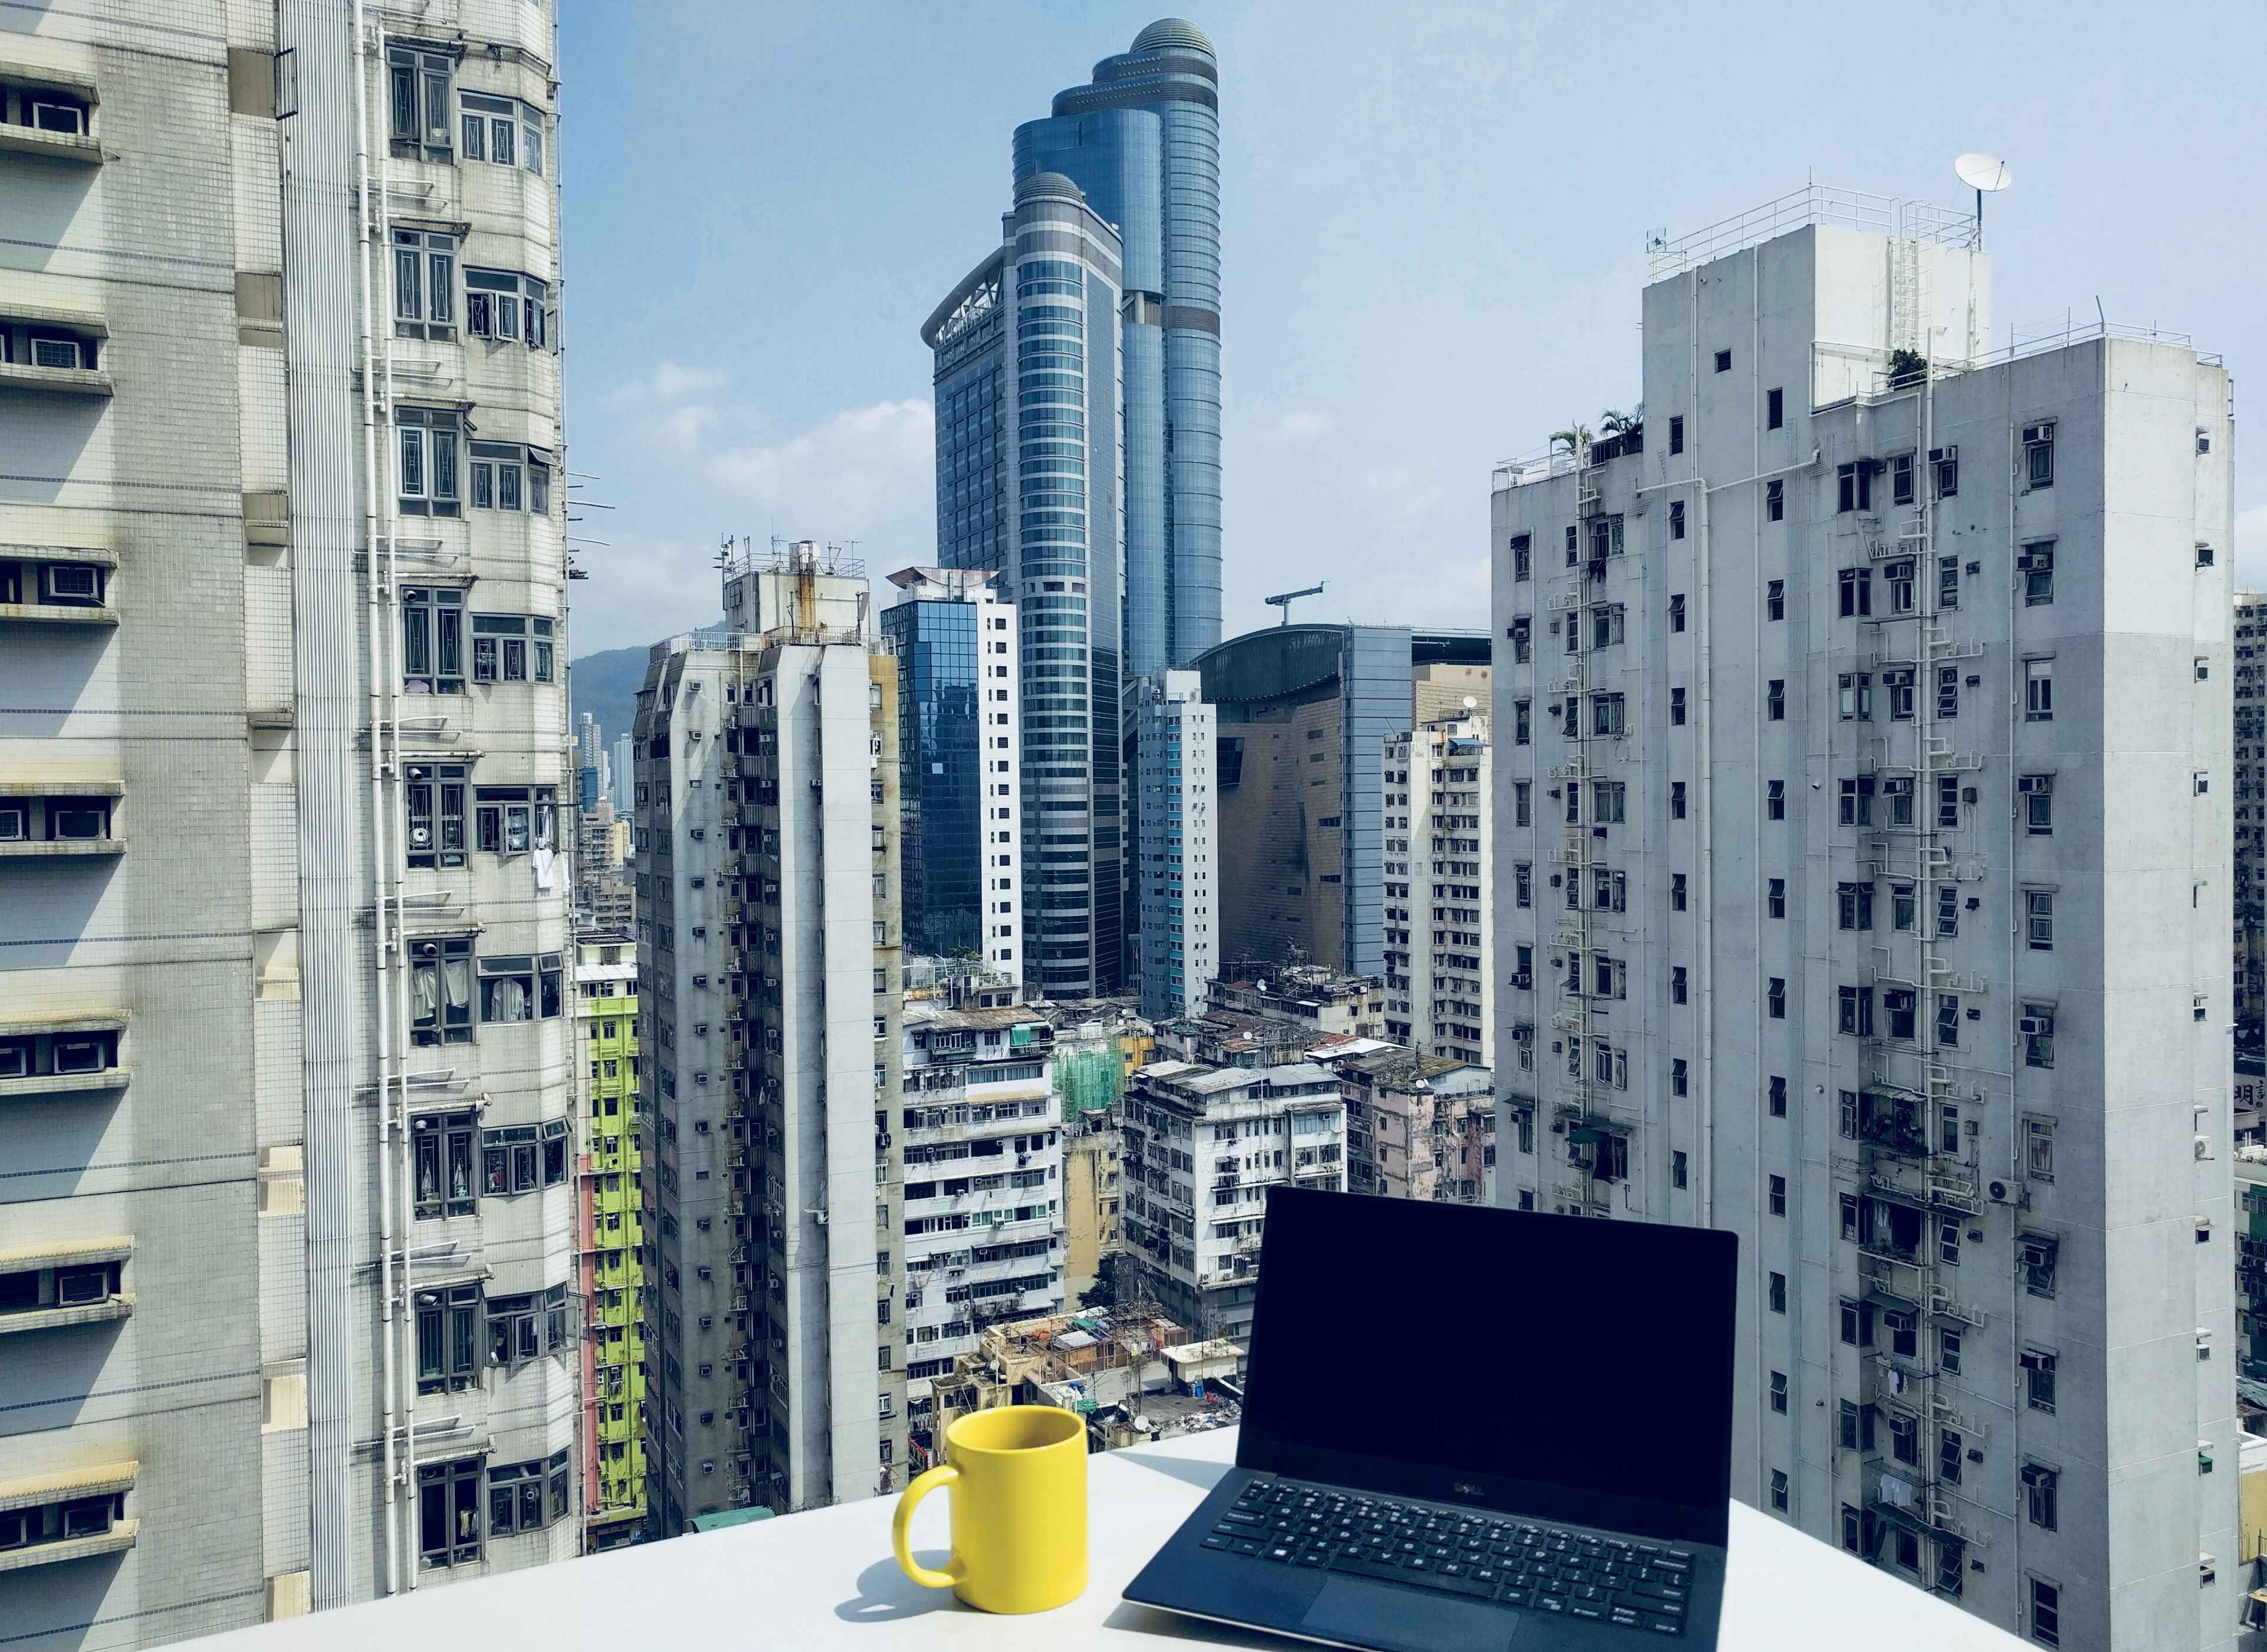 Working on a rooftop in Hong Kong